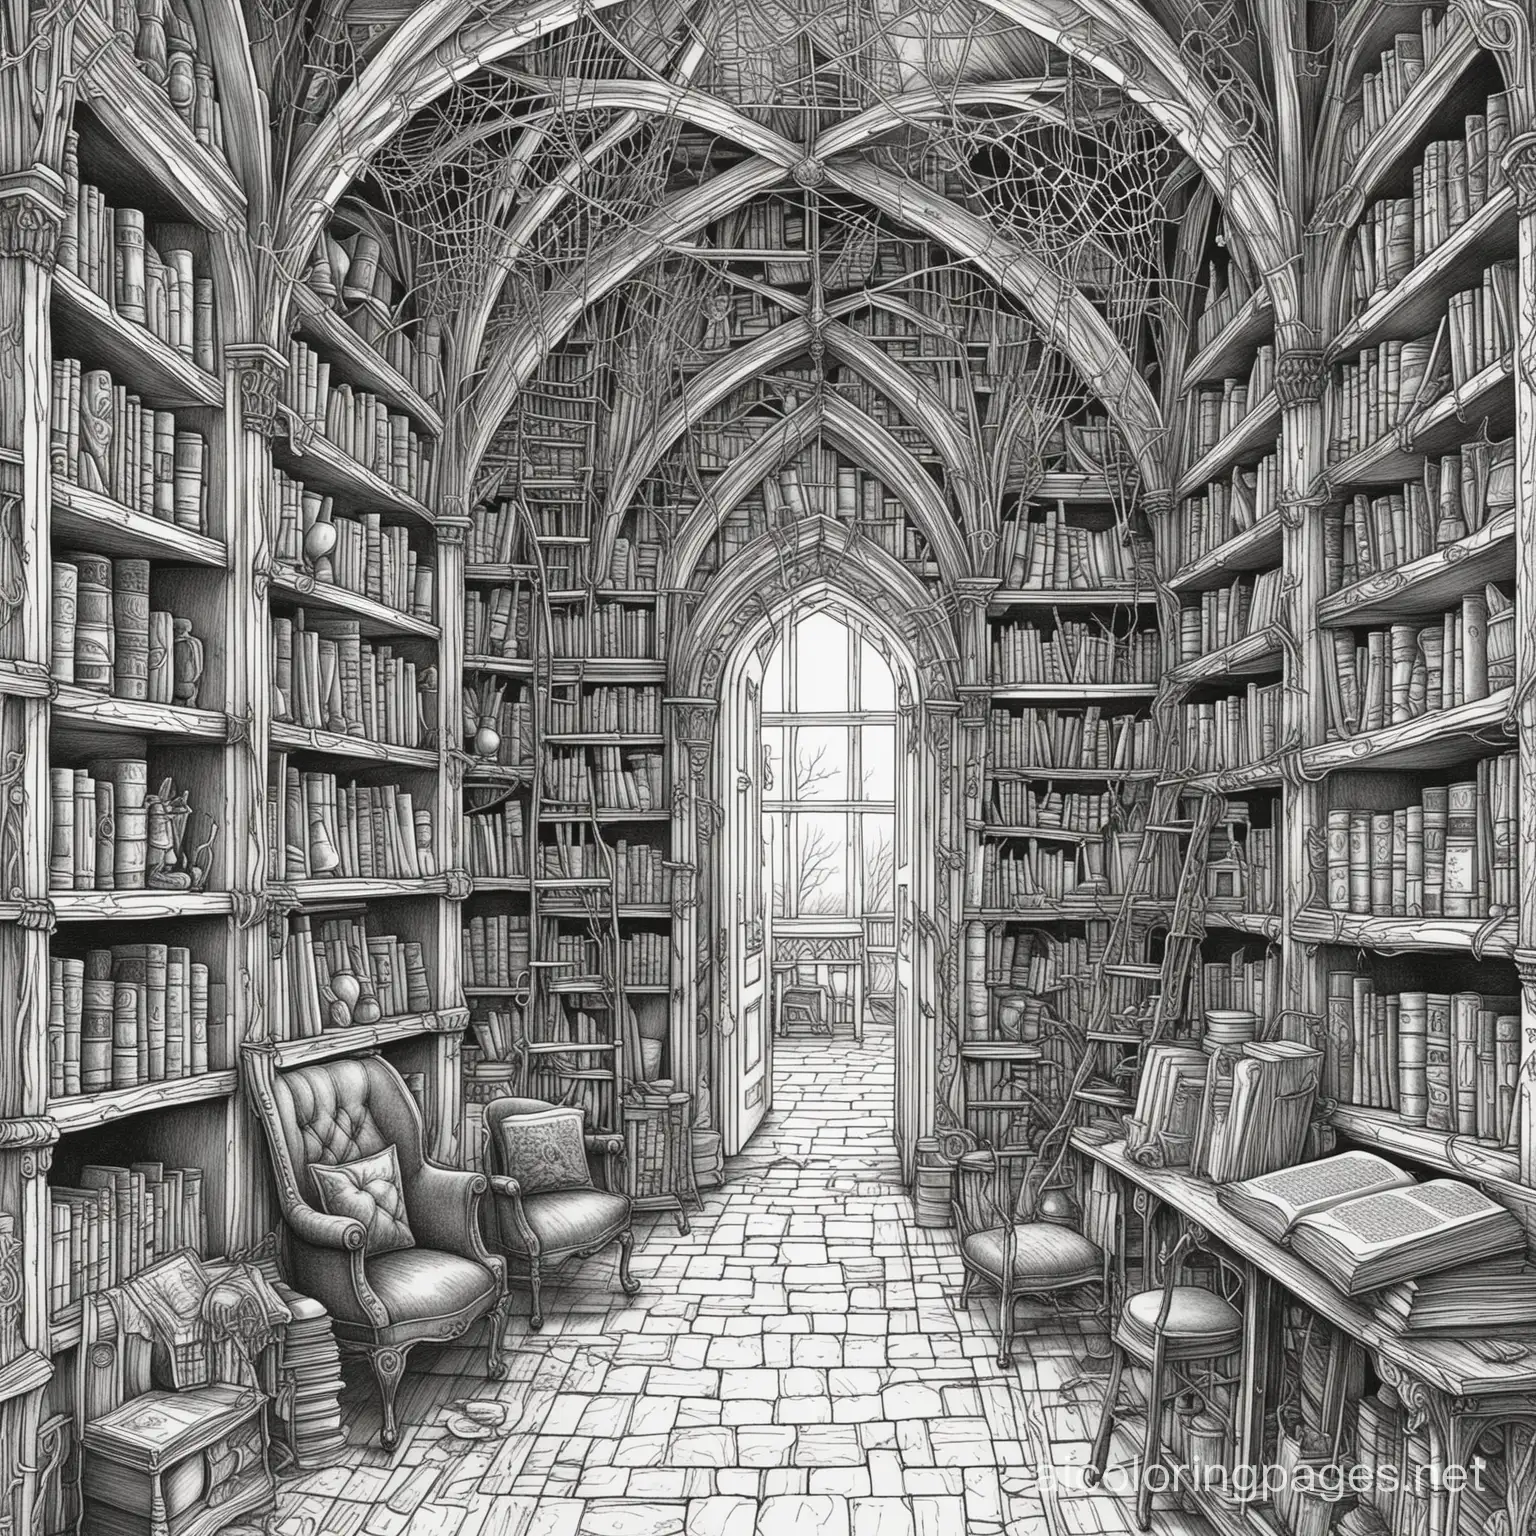 Gothic Bookstore: A cozy bookstore filled with antique books, cobwebs, and hidden passages, Coloring Page, black and white, line art, white background, Simplicity, Ample White Space. The background of the coloring page is plain white to make it easy for young children to color within the lines. The outlines of all the subjects are easy to distinguish, making it simple for kids to color without too much difficulty